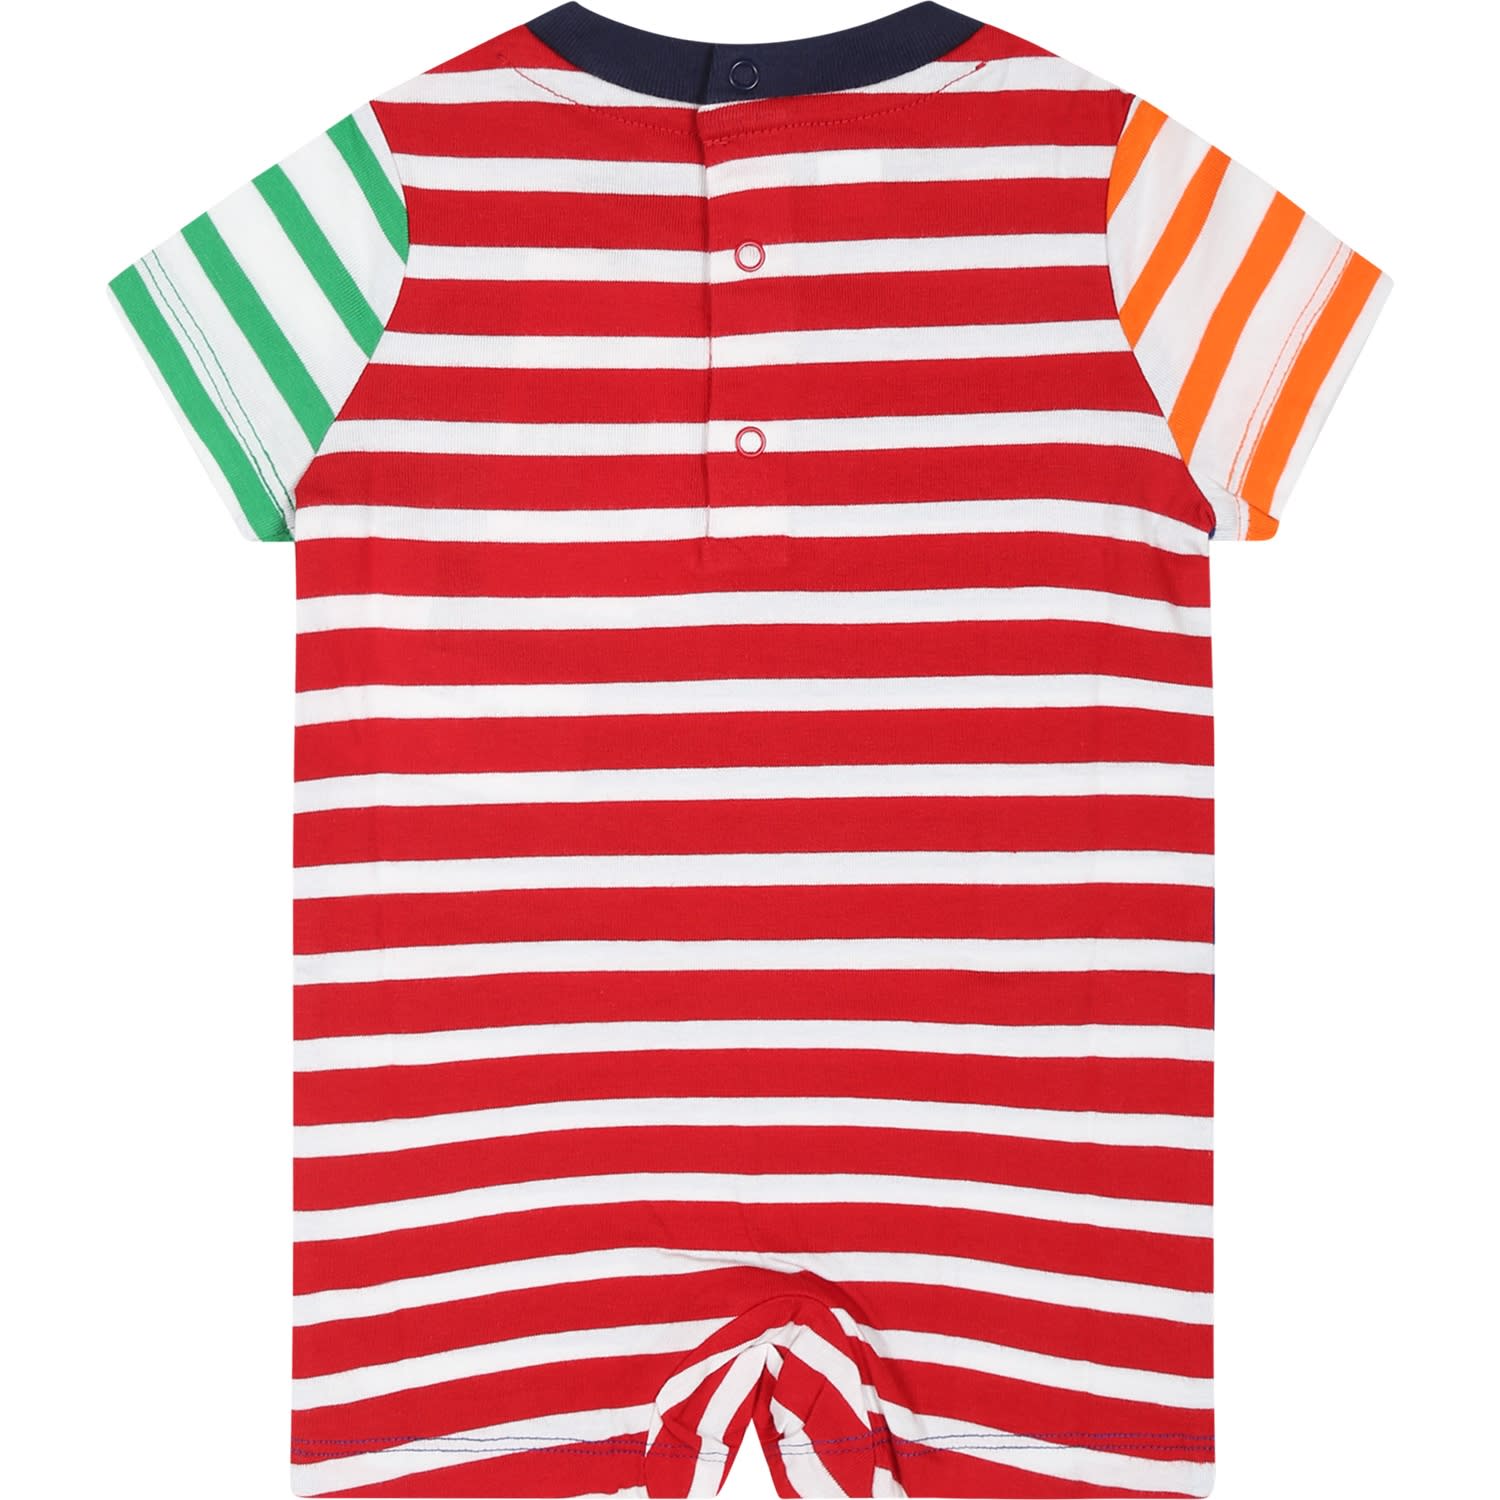 Shop Ralph Lauren Blue Romper For Baby Boy With Pony In Multicolor